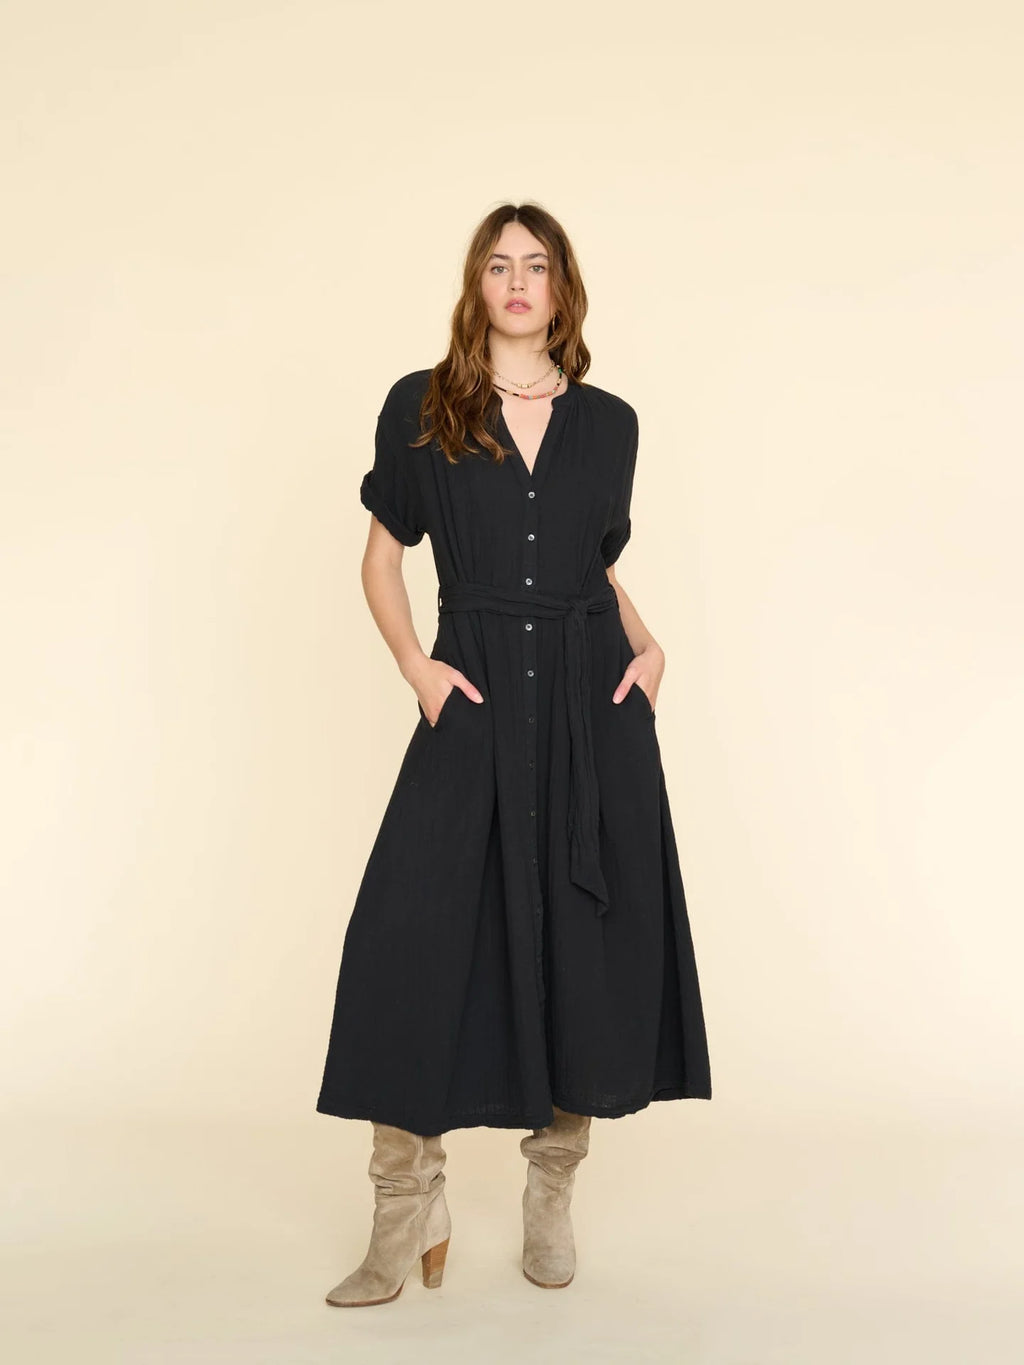 Cate is made in our washed double faced cotton gauze for a soft, gently crinkled feel. This XIRENA favorite has a button-front placket, a-line skirt, side seam pockets, and adjustable tie-belt.